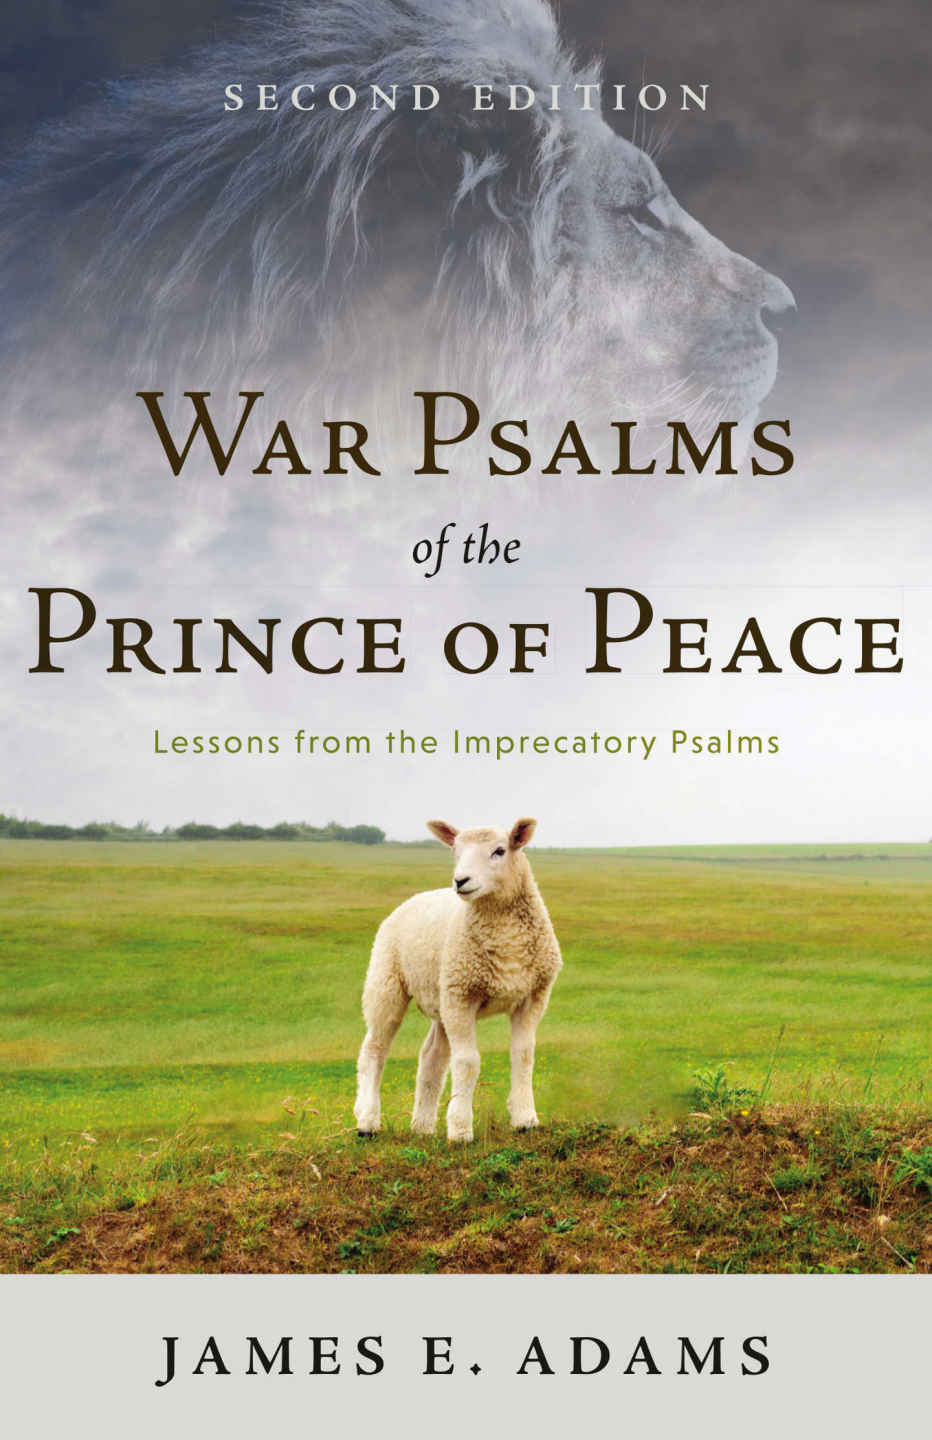 War Psalms of the Prince of Peace: Lessons From the Imprecatory Psalms, Second Edition